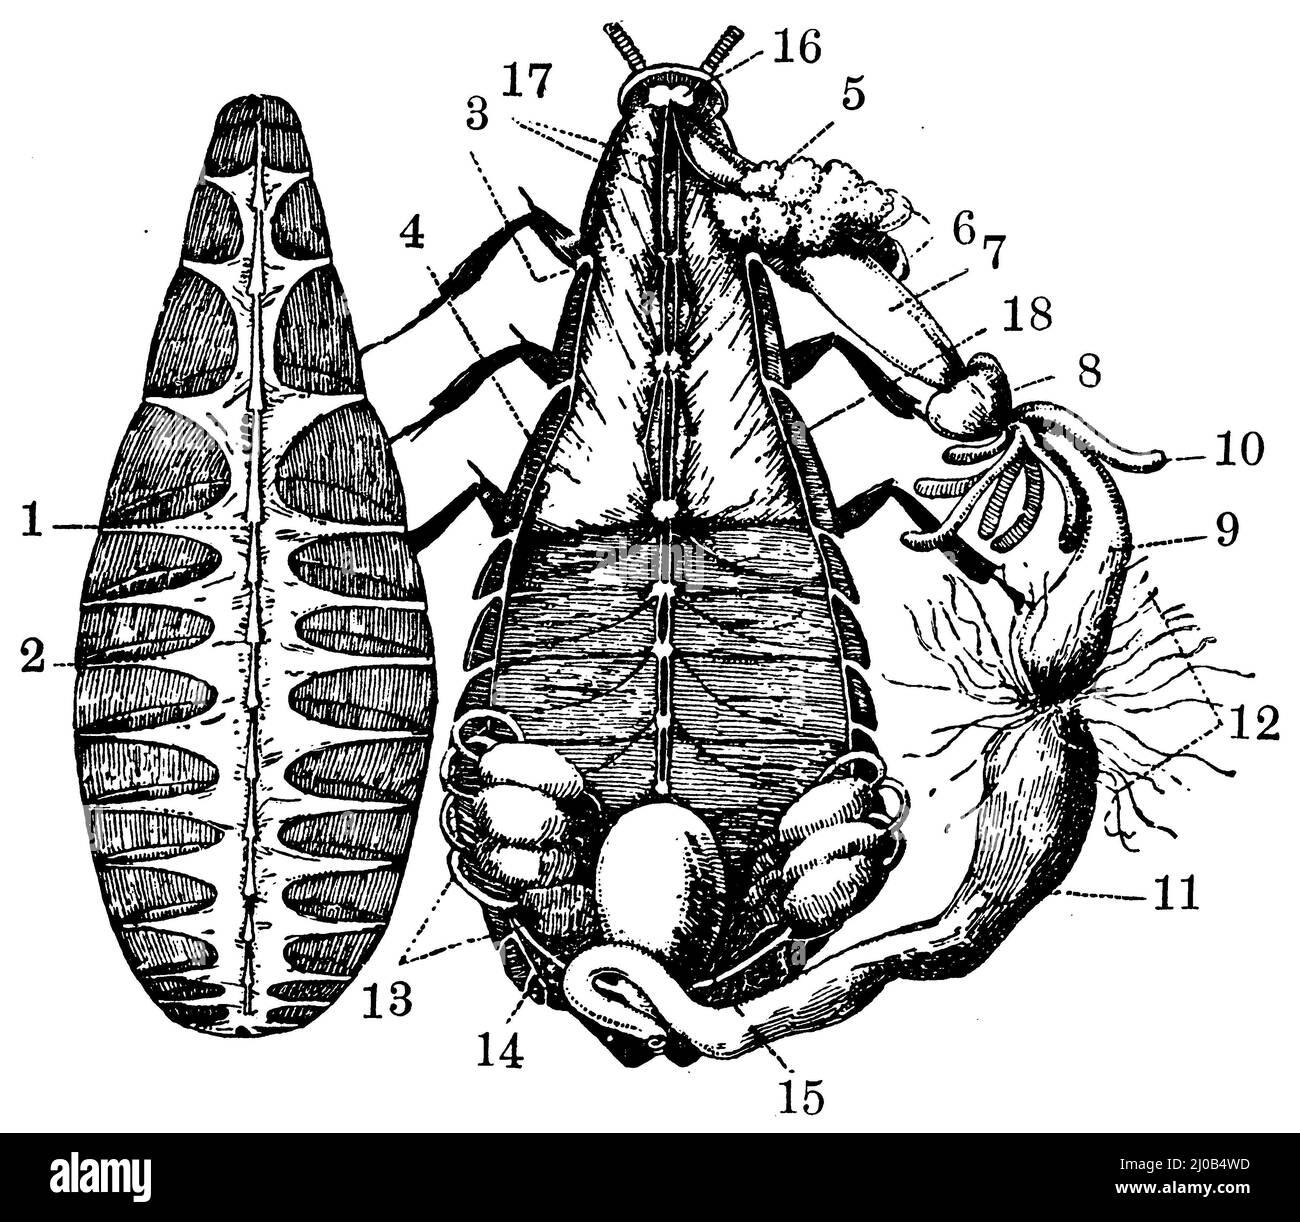 oriental cockroach, internal organs: Under the lifted back cover 1 the heart and 2 muscles, which cause the blood circulation. 3 Respiratory opening (stigma). 4 Main longitudinal trunk of the respiratory tubes (trachea). 5 Salivary glands and 6 collection space for secreted saliva. 7 Goiter. 8 Stomach. 9 Midgut with blind tubes (10). 11 Rectum. 12 Excretory tools. 13 Ovaries. 14 Fallopian tubes and 15 space into which they open. 16 Upper gavage node. 17 Abdominal medulla. 18 Pectoral muscles, Blatta orientalis, anonym (zoology book, 1928), Gemeine Küchenschabe, innere Organe: Unter der abgehob Stock Photo